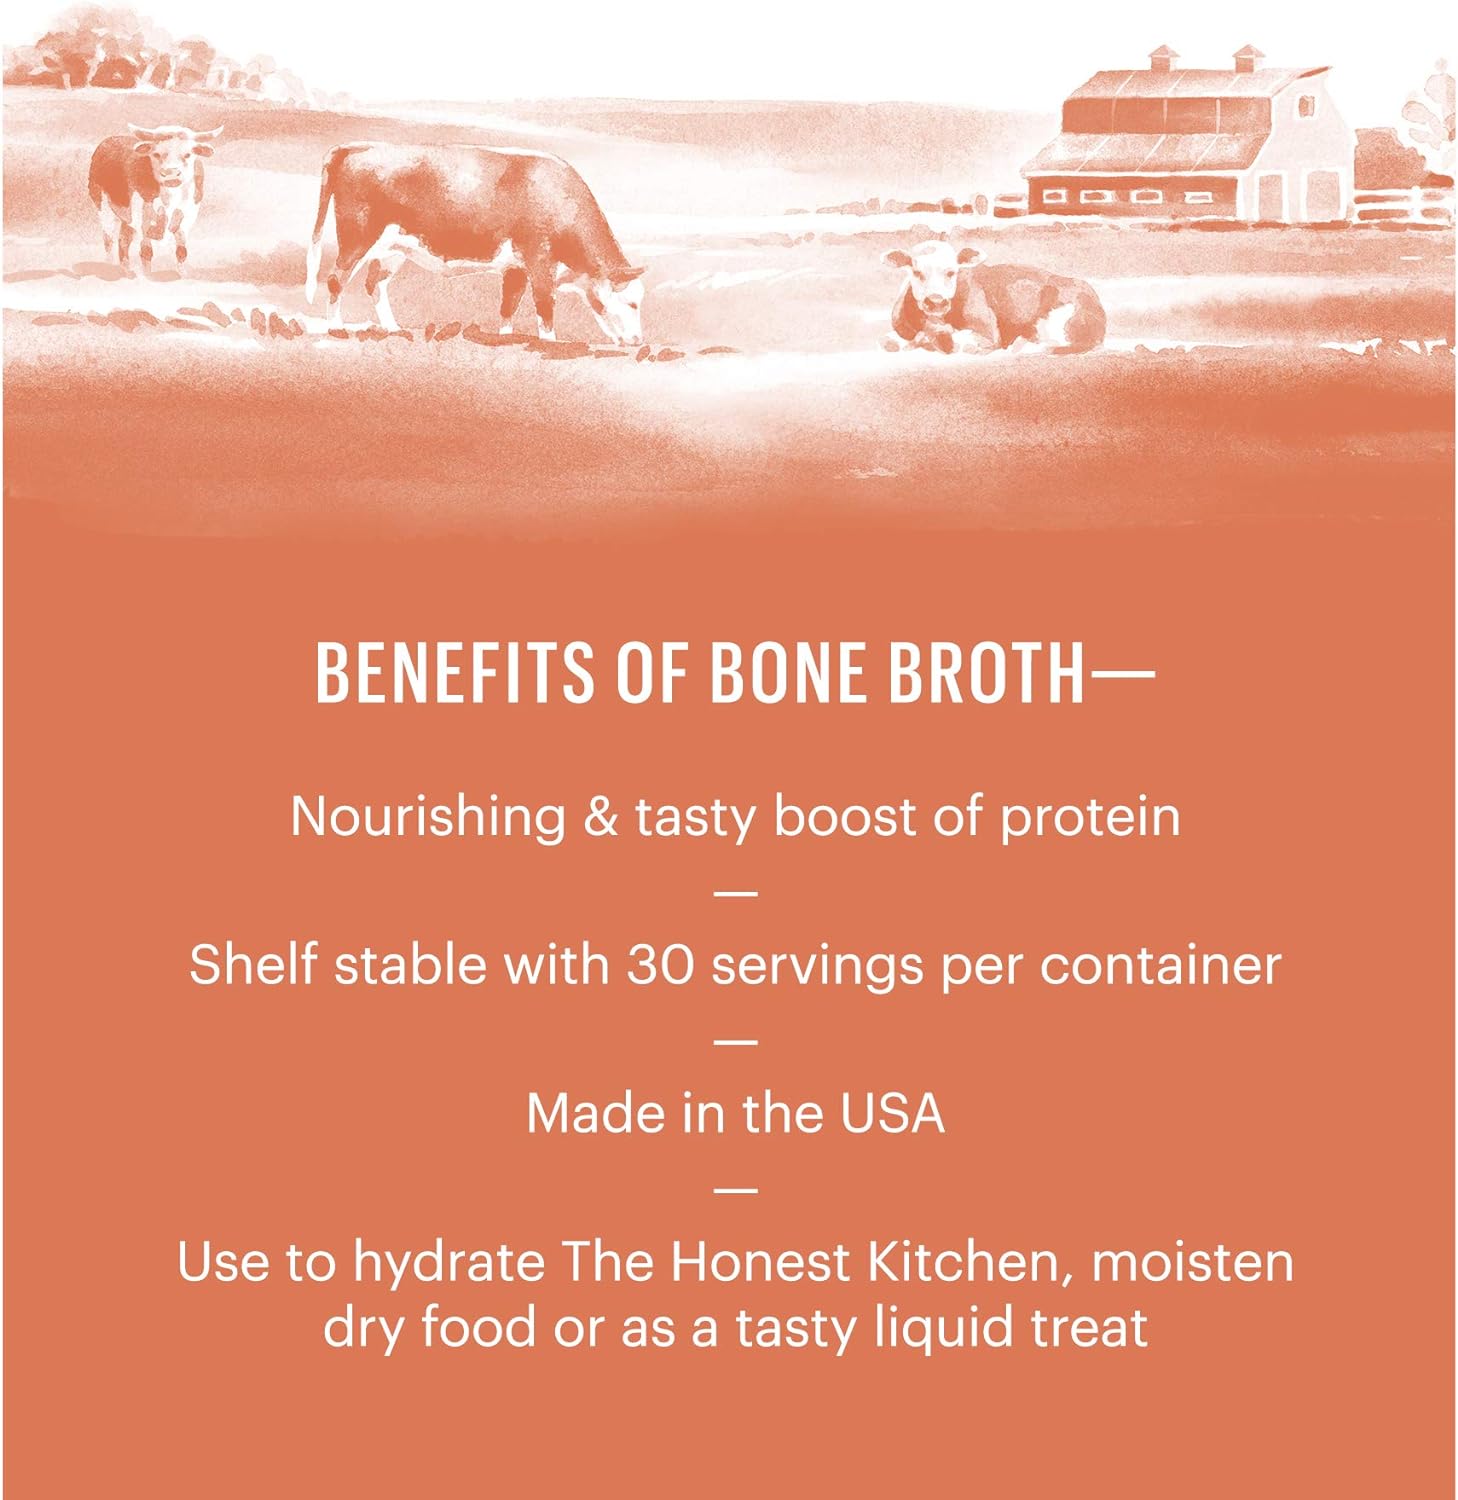 The Honest Kitchen Daily Boosters: Instant Beef Bone Broth with Turmeric for Dogs, 3.5g Sachets, Pack of 12 : Pet Supplies